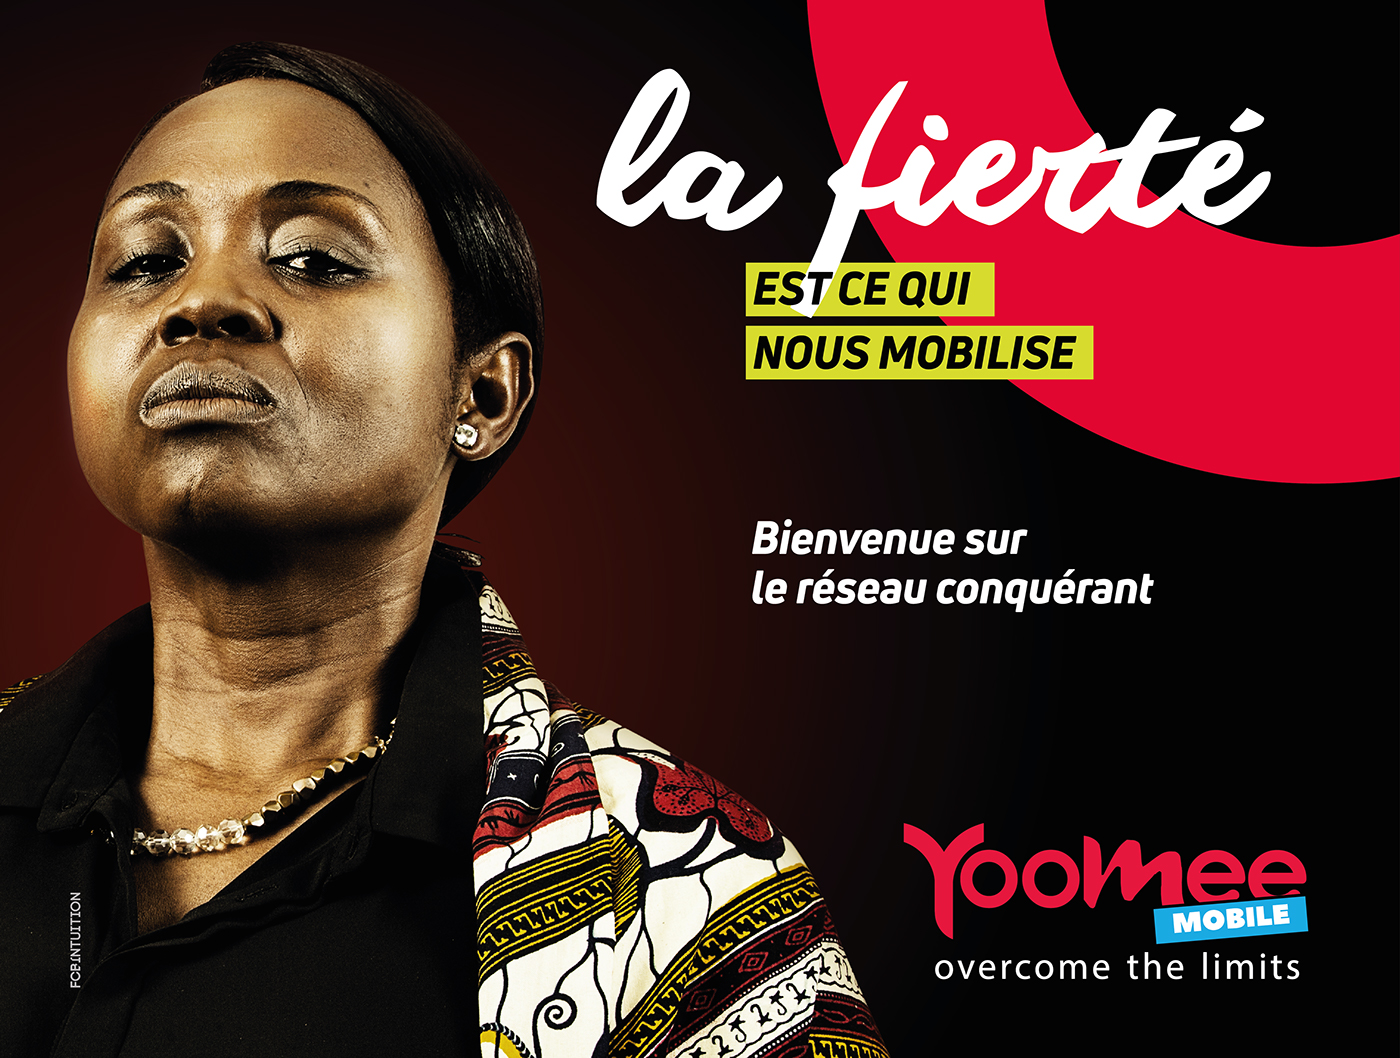 YooMee Mobile mobile cameroun Sage fierté innovation FCB Intuition determination